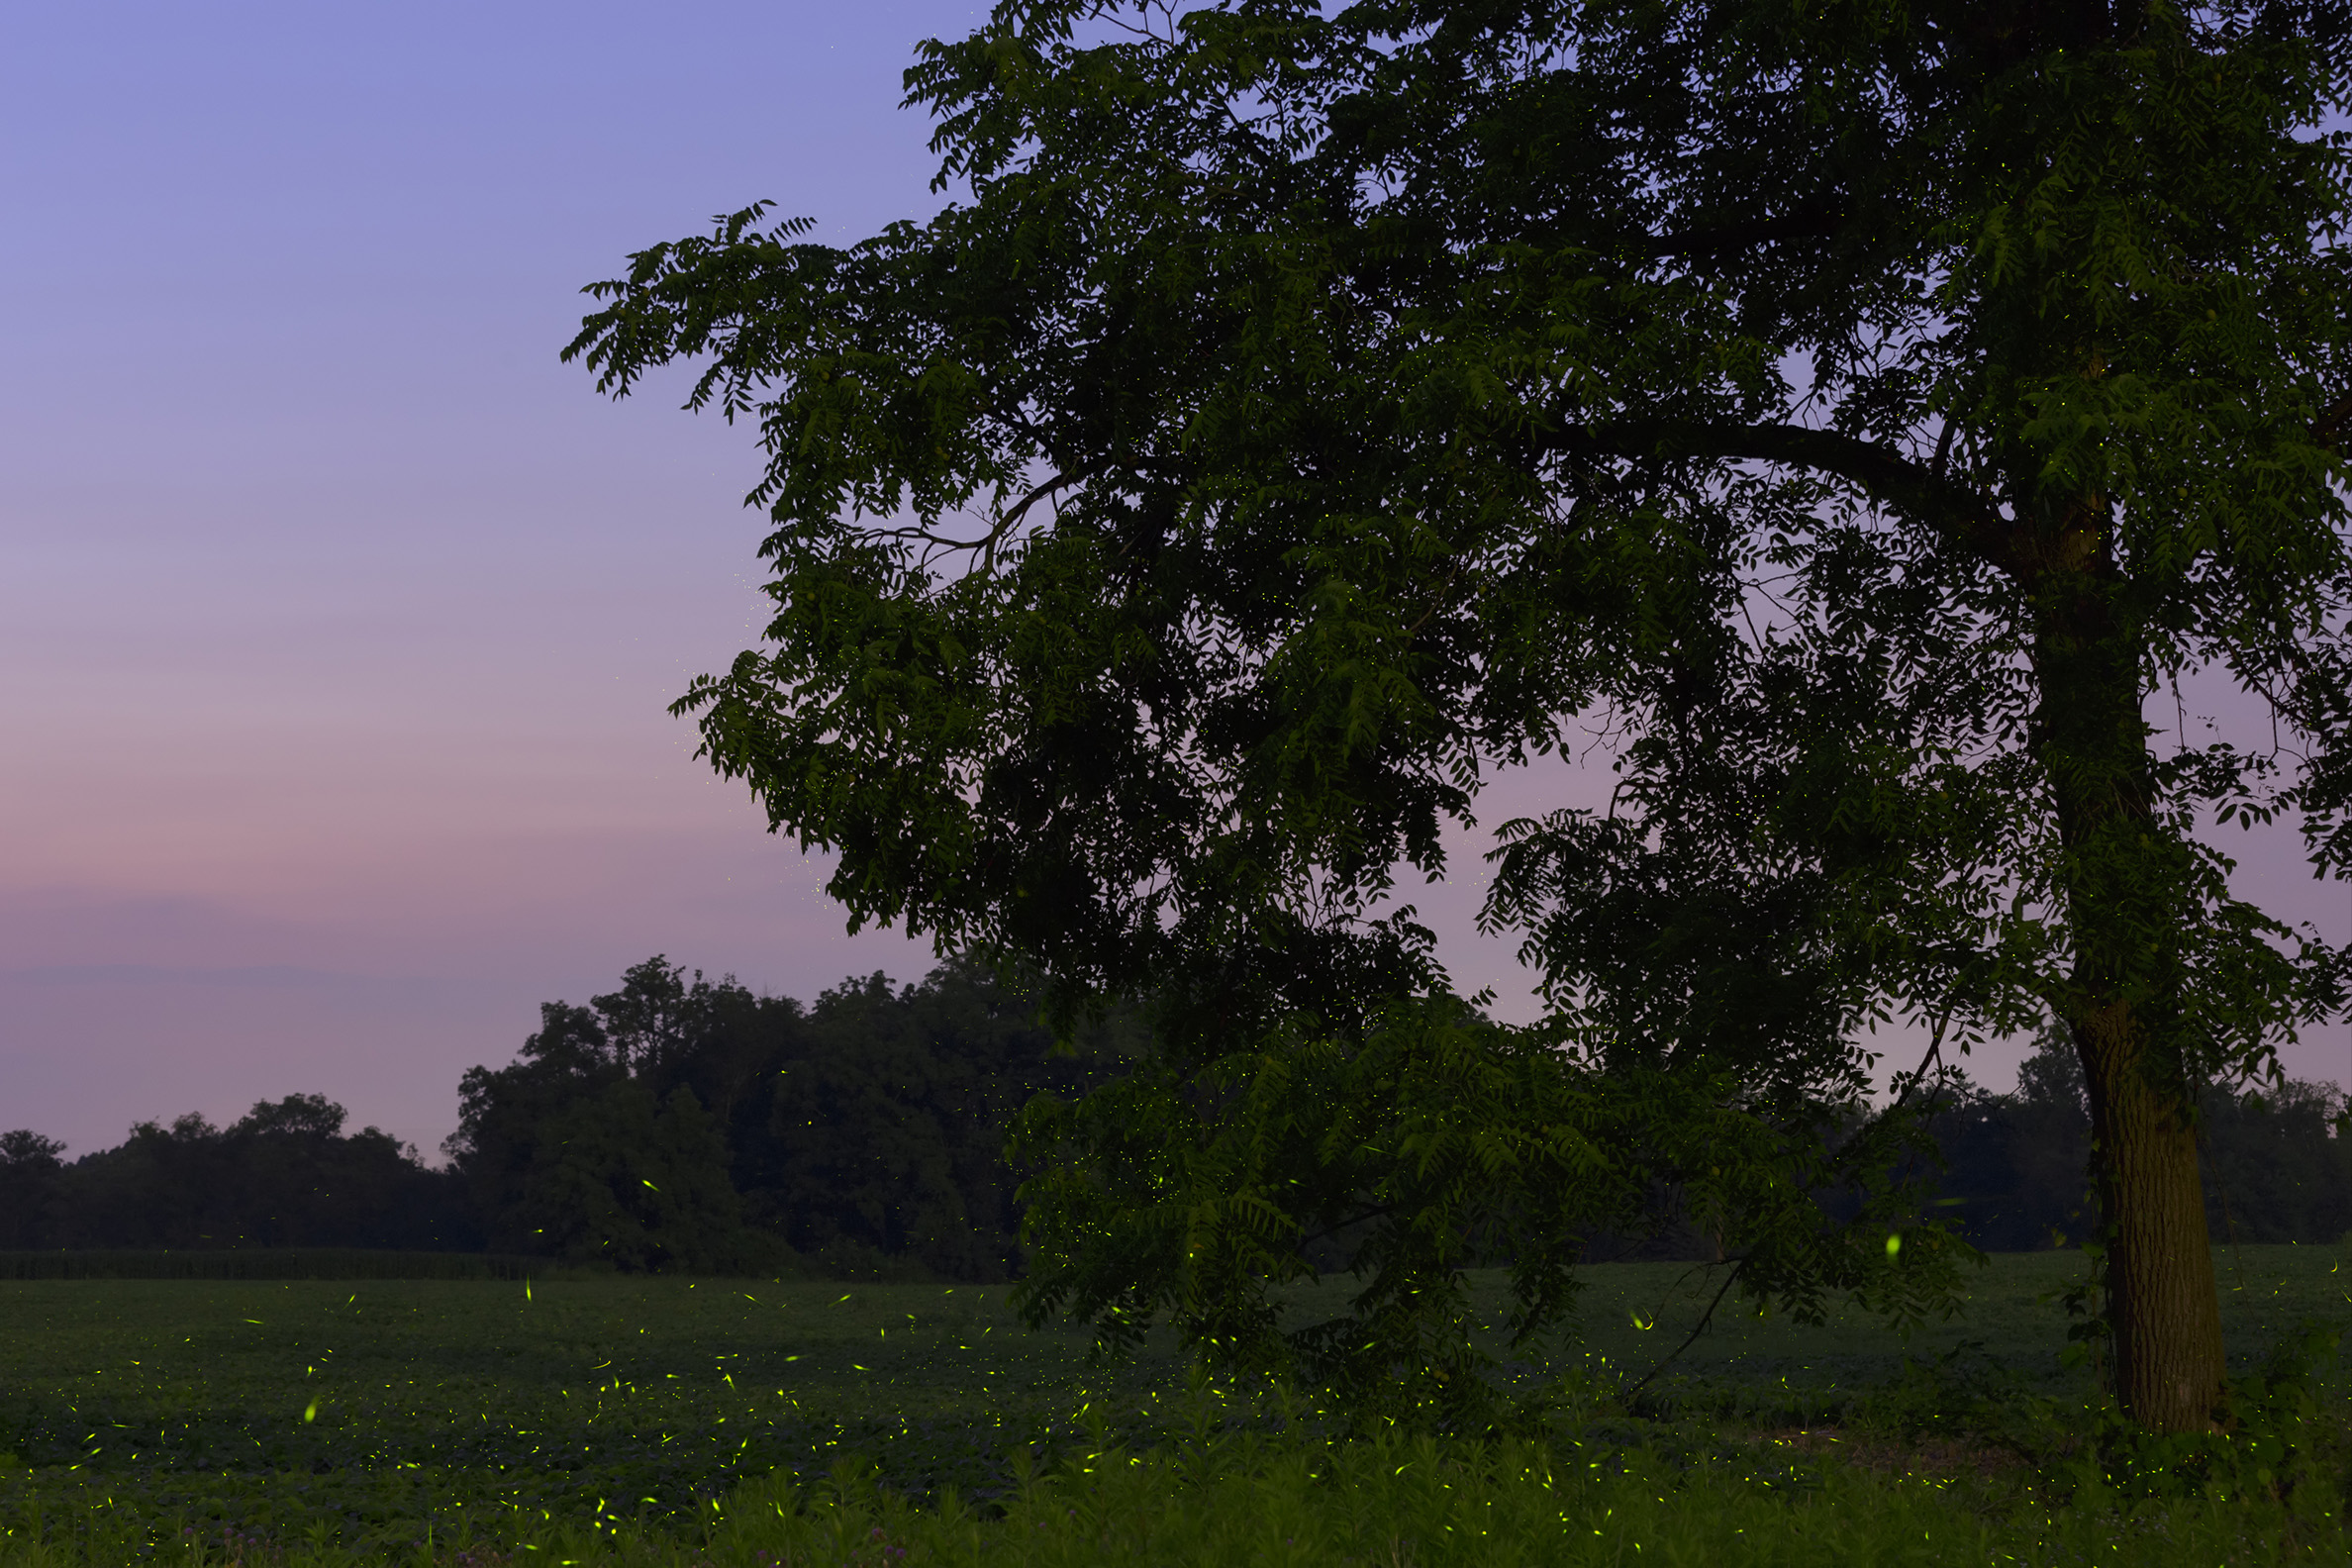 The green flashes of fireflies fill the darkness of this meadow as dusk approaches